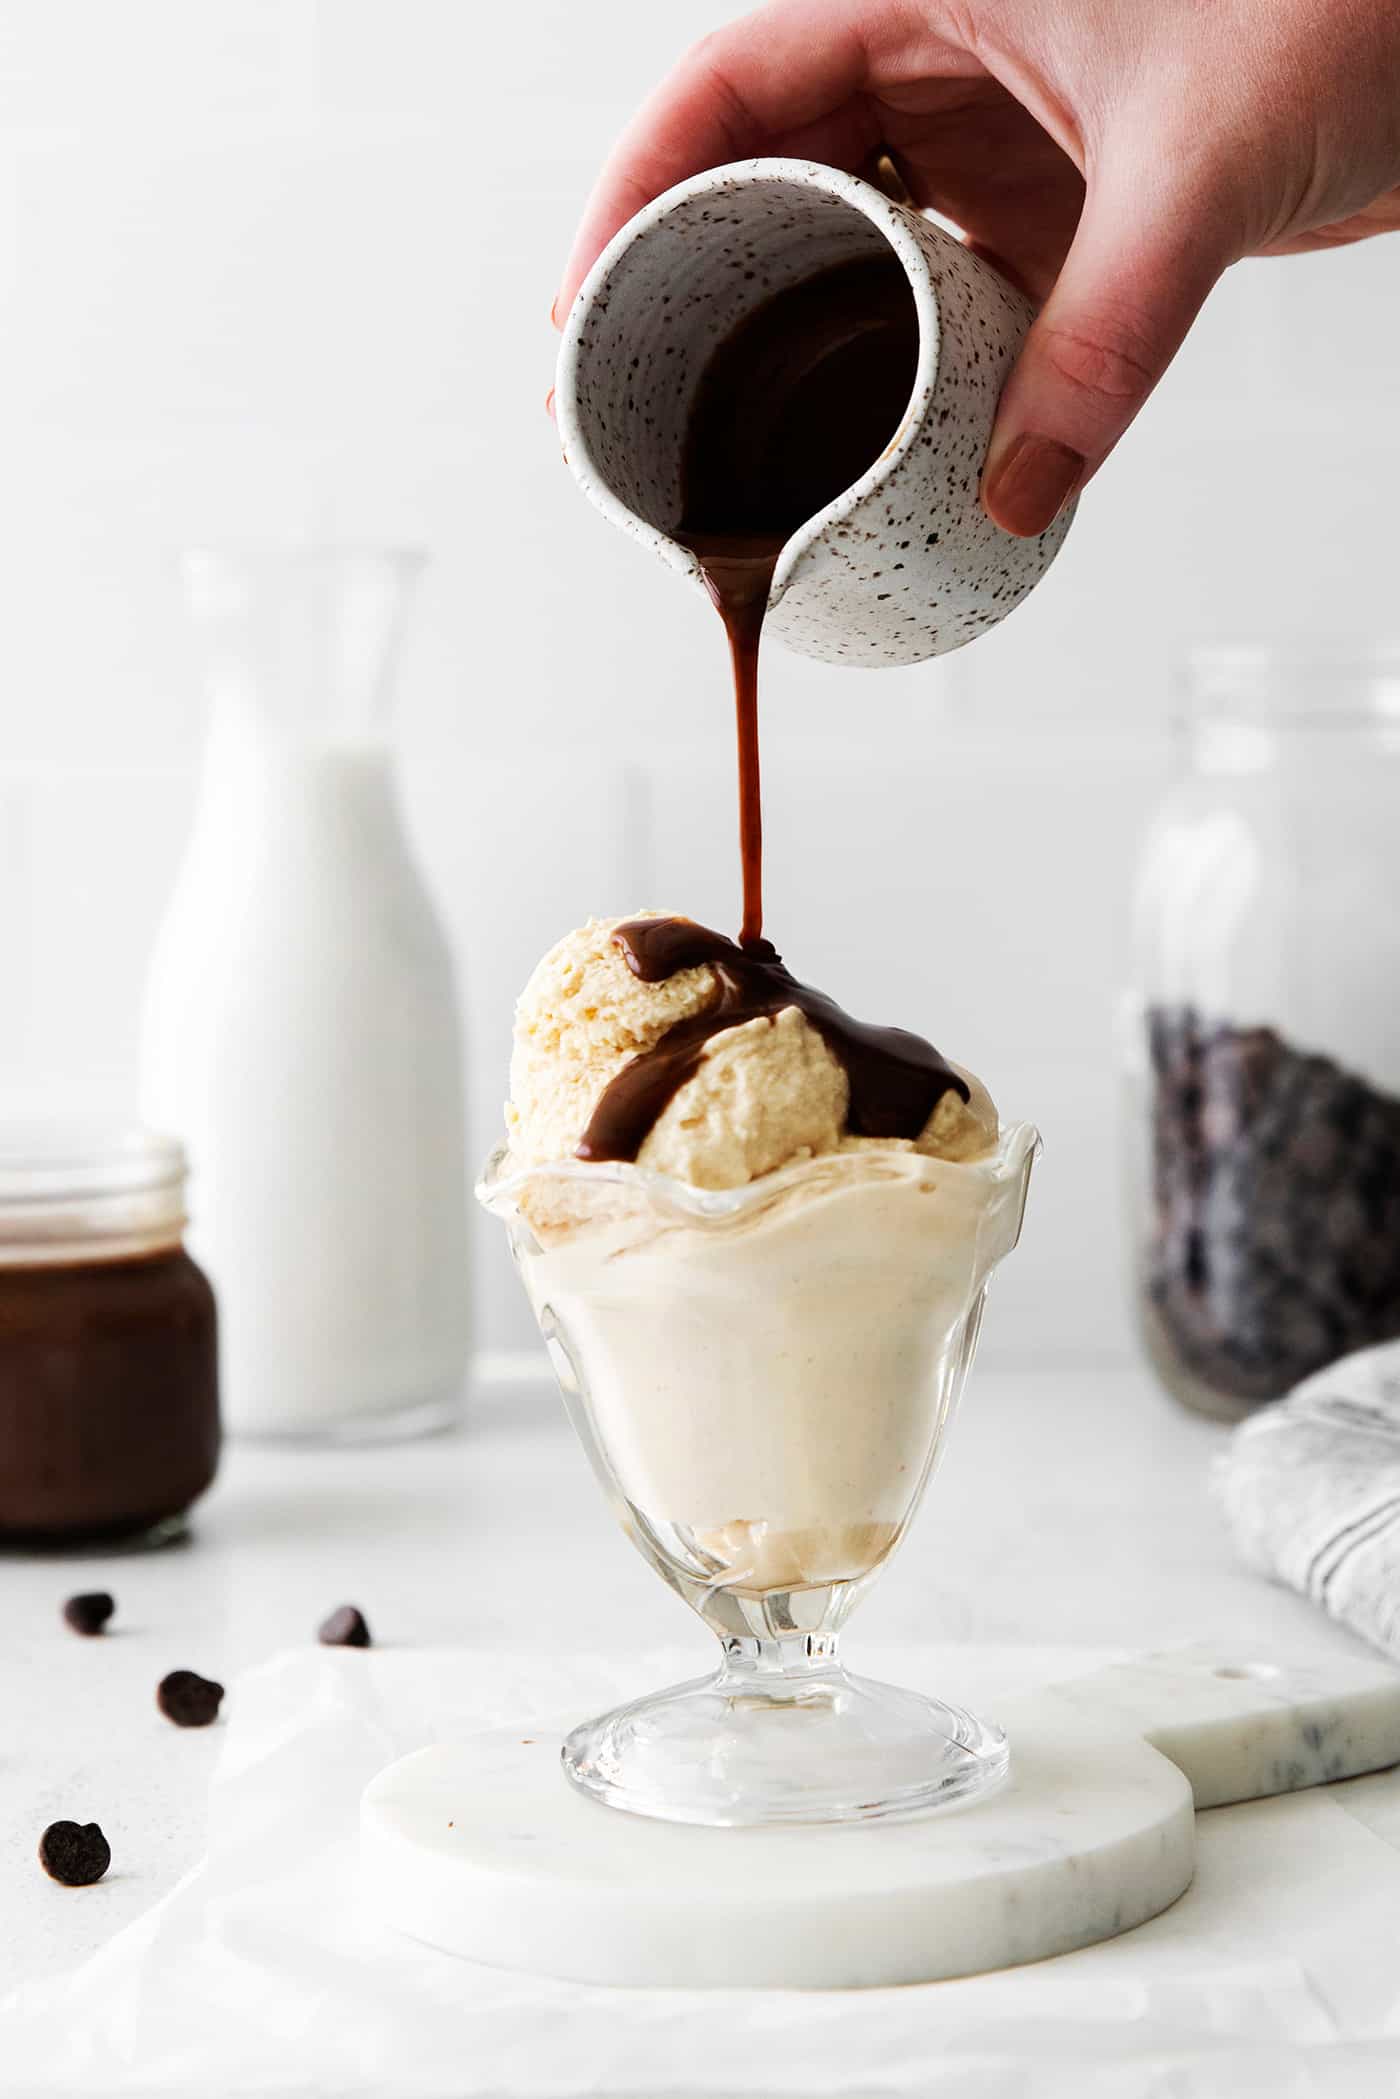 A hand pouring hot fudge sauce over scoops of ice cream